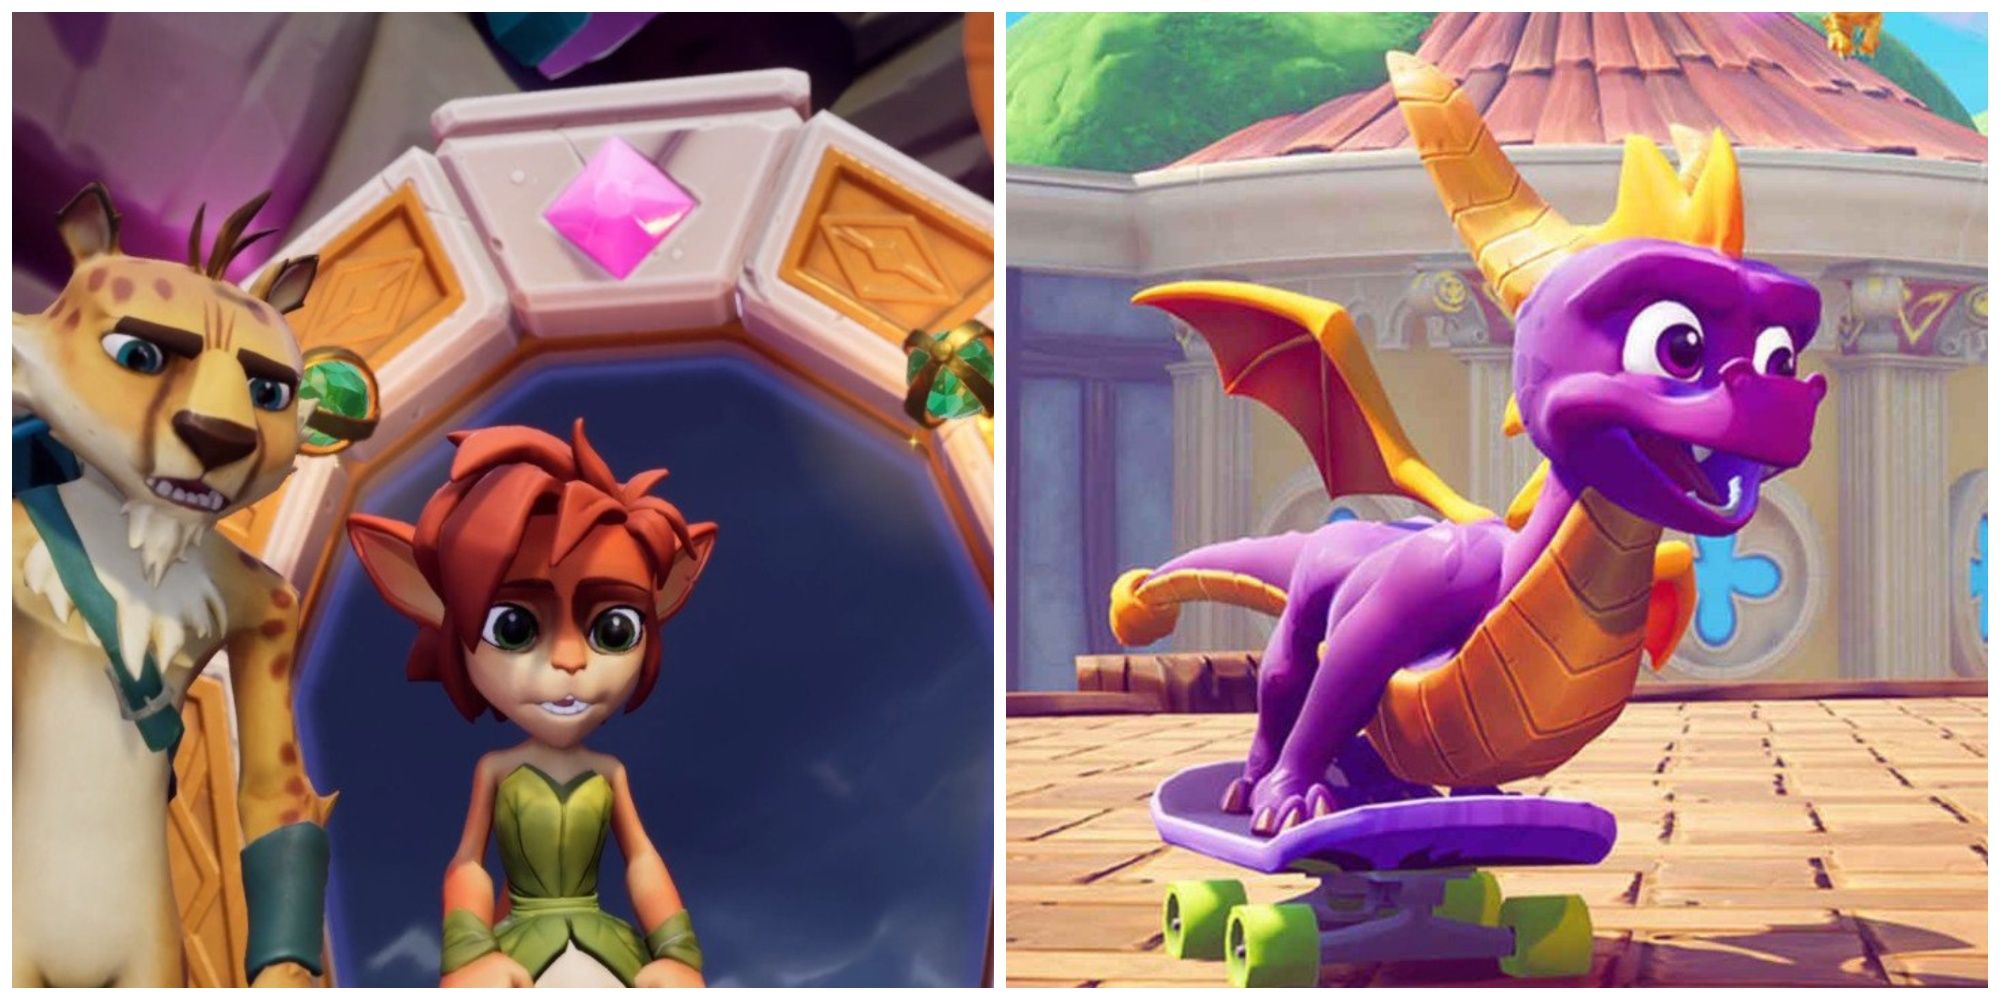 Feature image depicting Spyro and Hunter